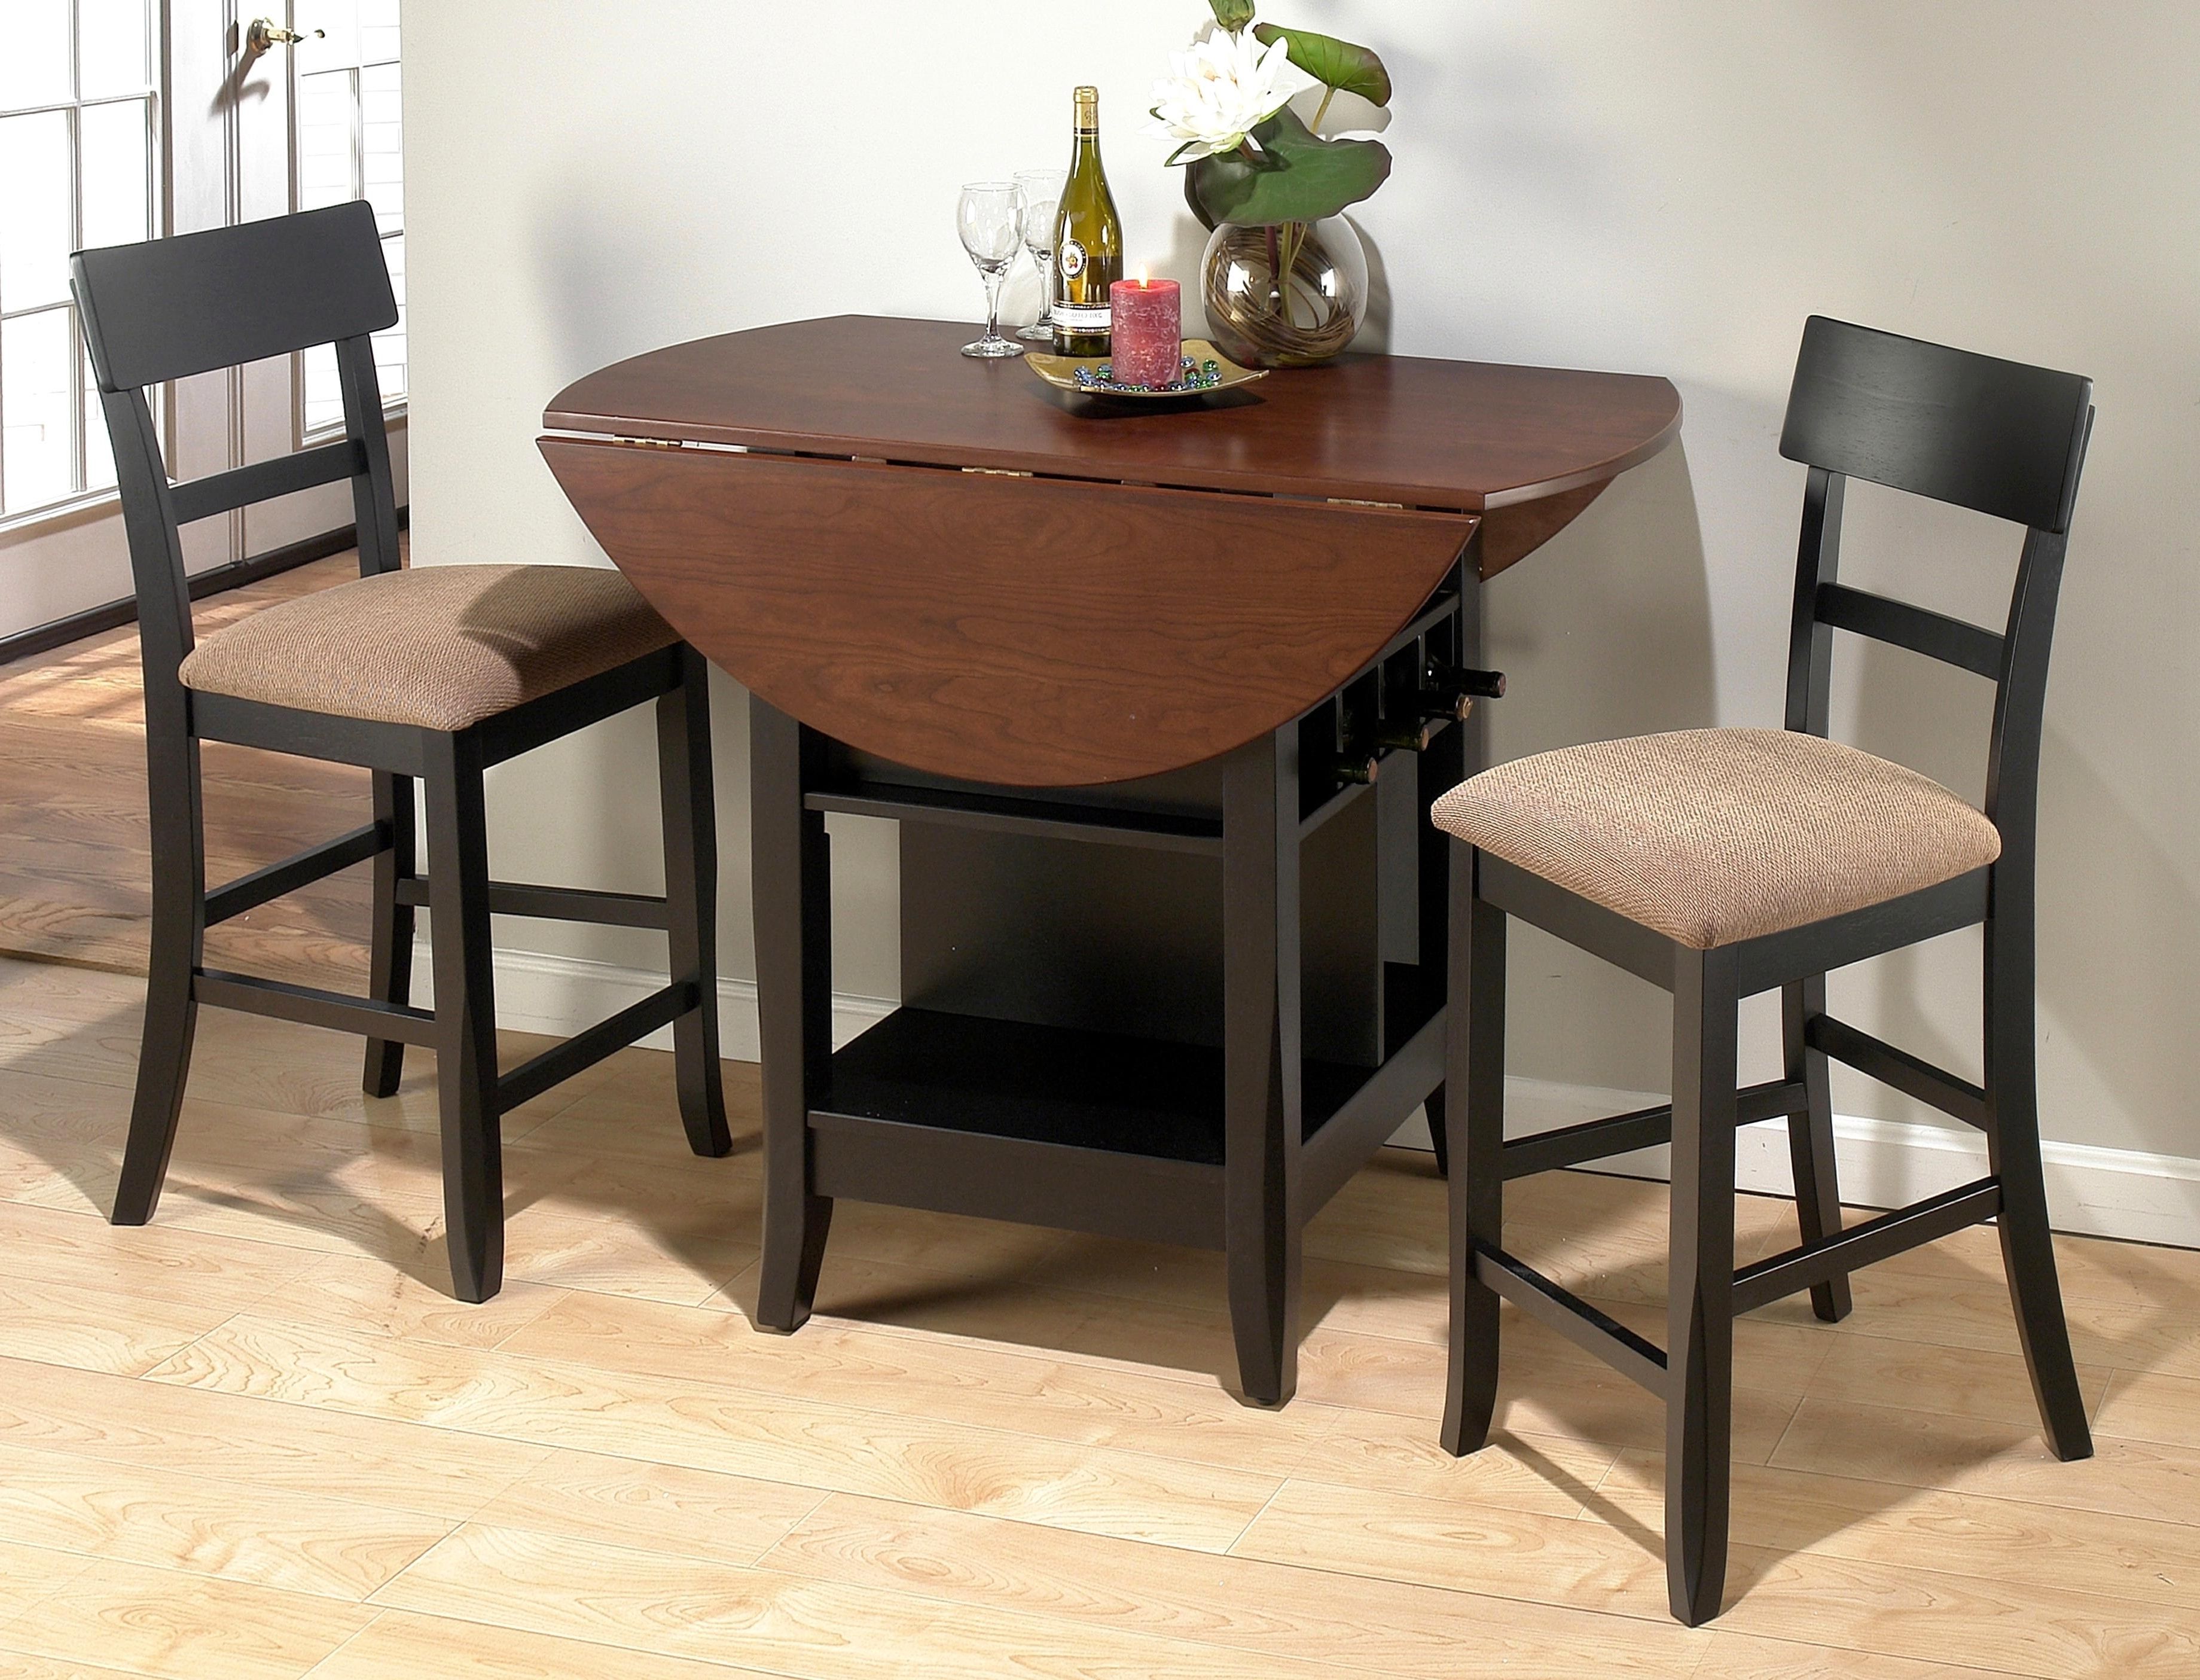 Two Chair Dining Tables In Fashionable Outstanding Dining Table Modern Tables Chairs Small Sets Ideas G (View 17 of 25)